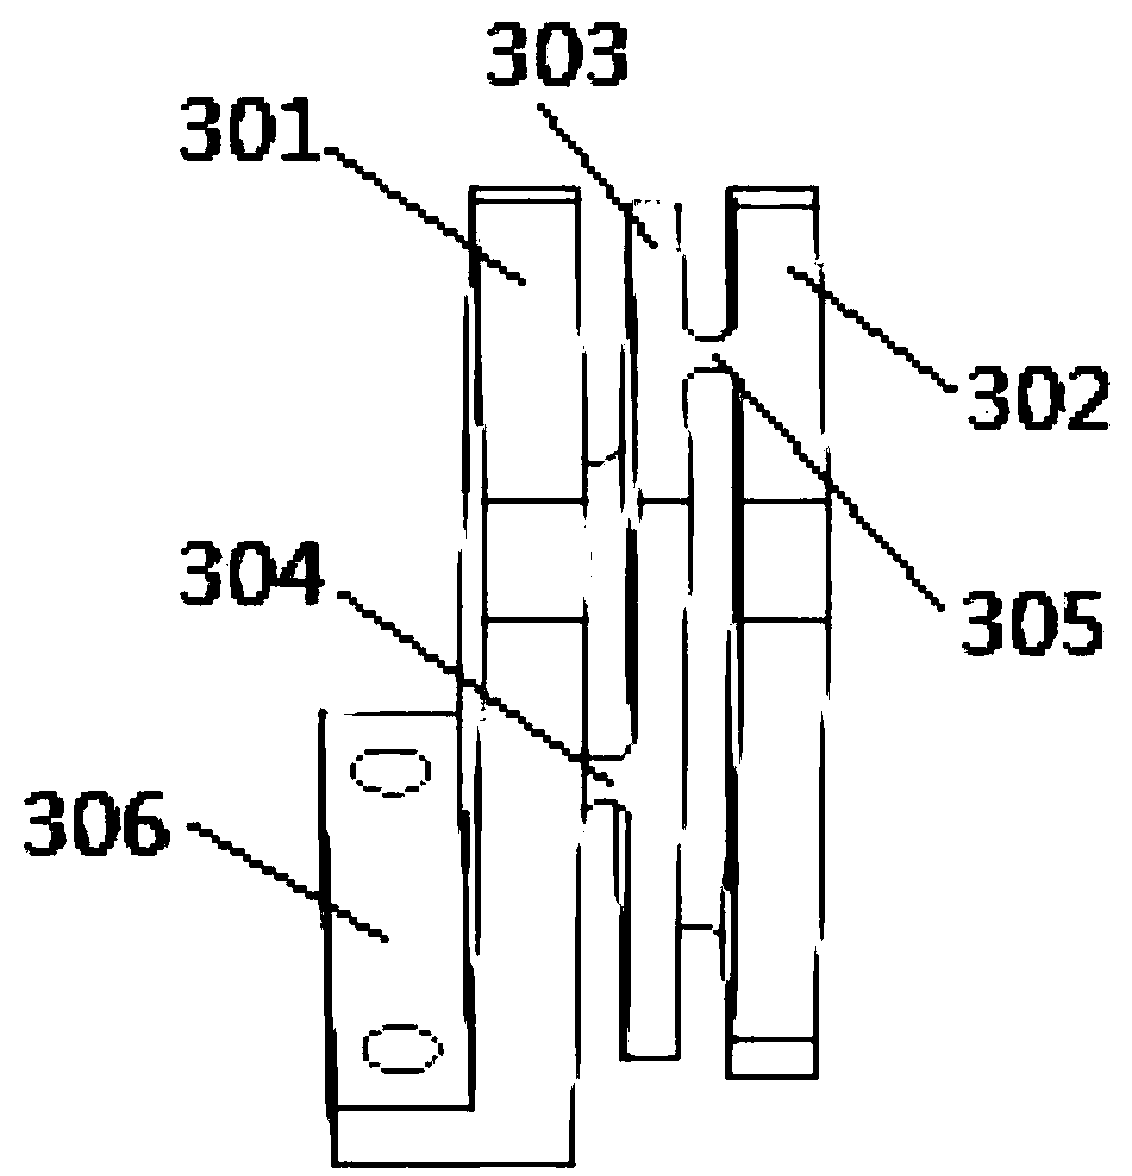 Precision mirror frame based on a flexible hinge